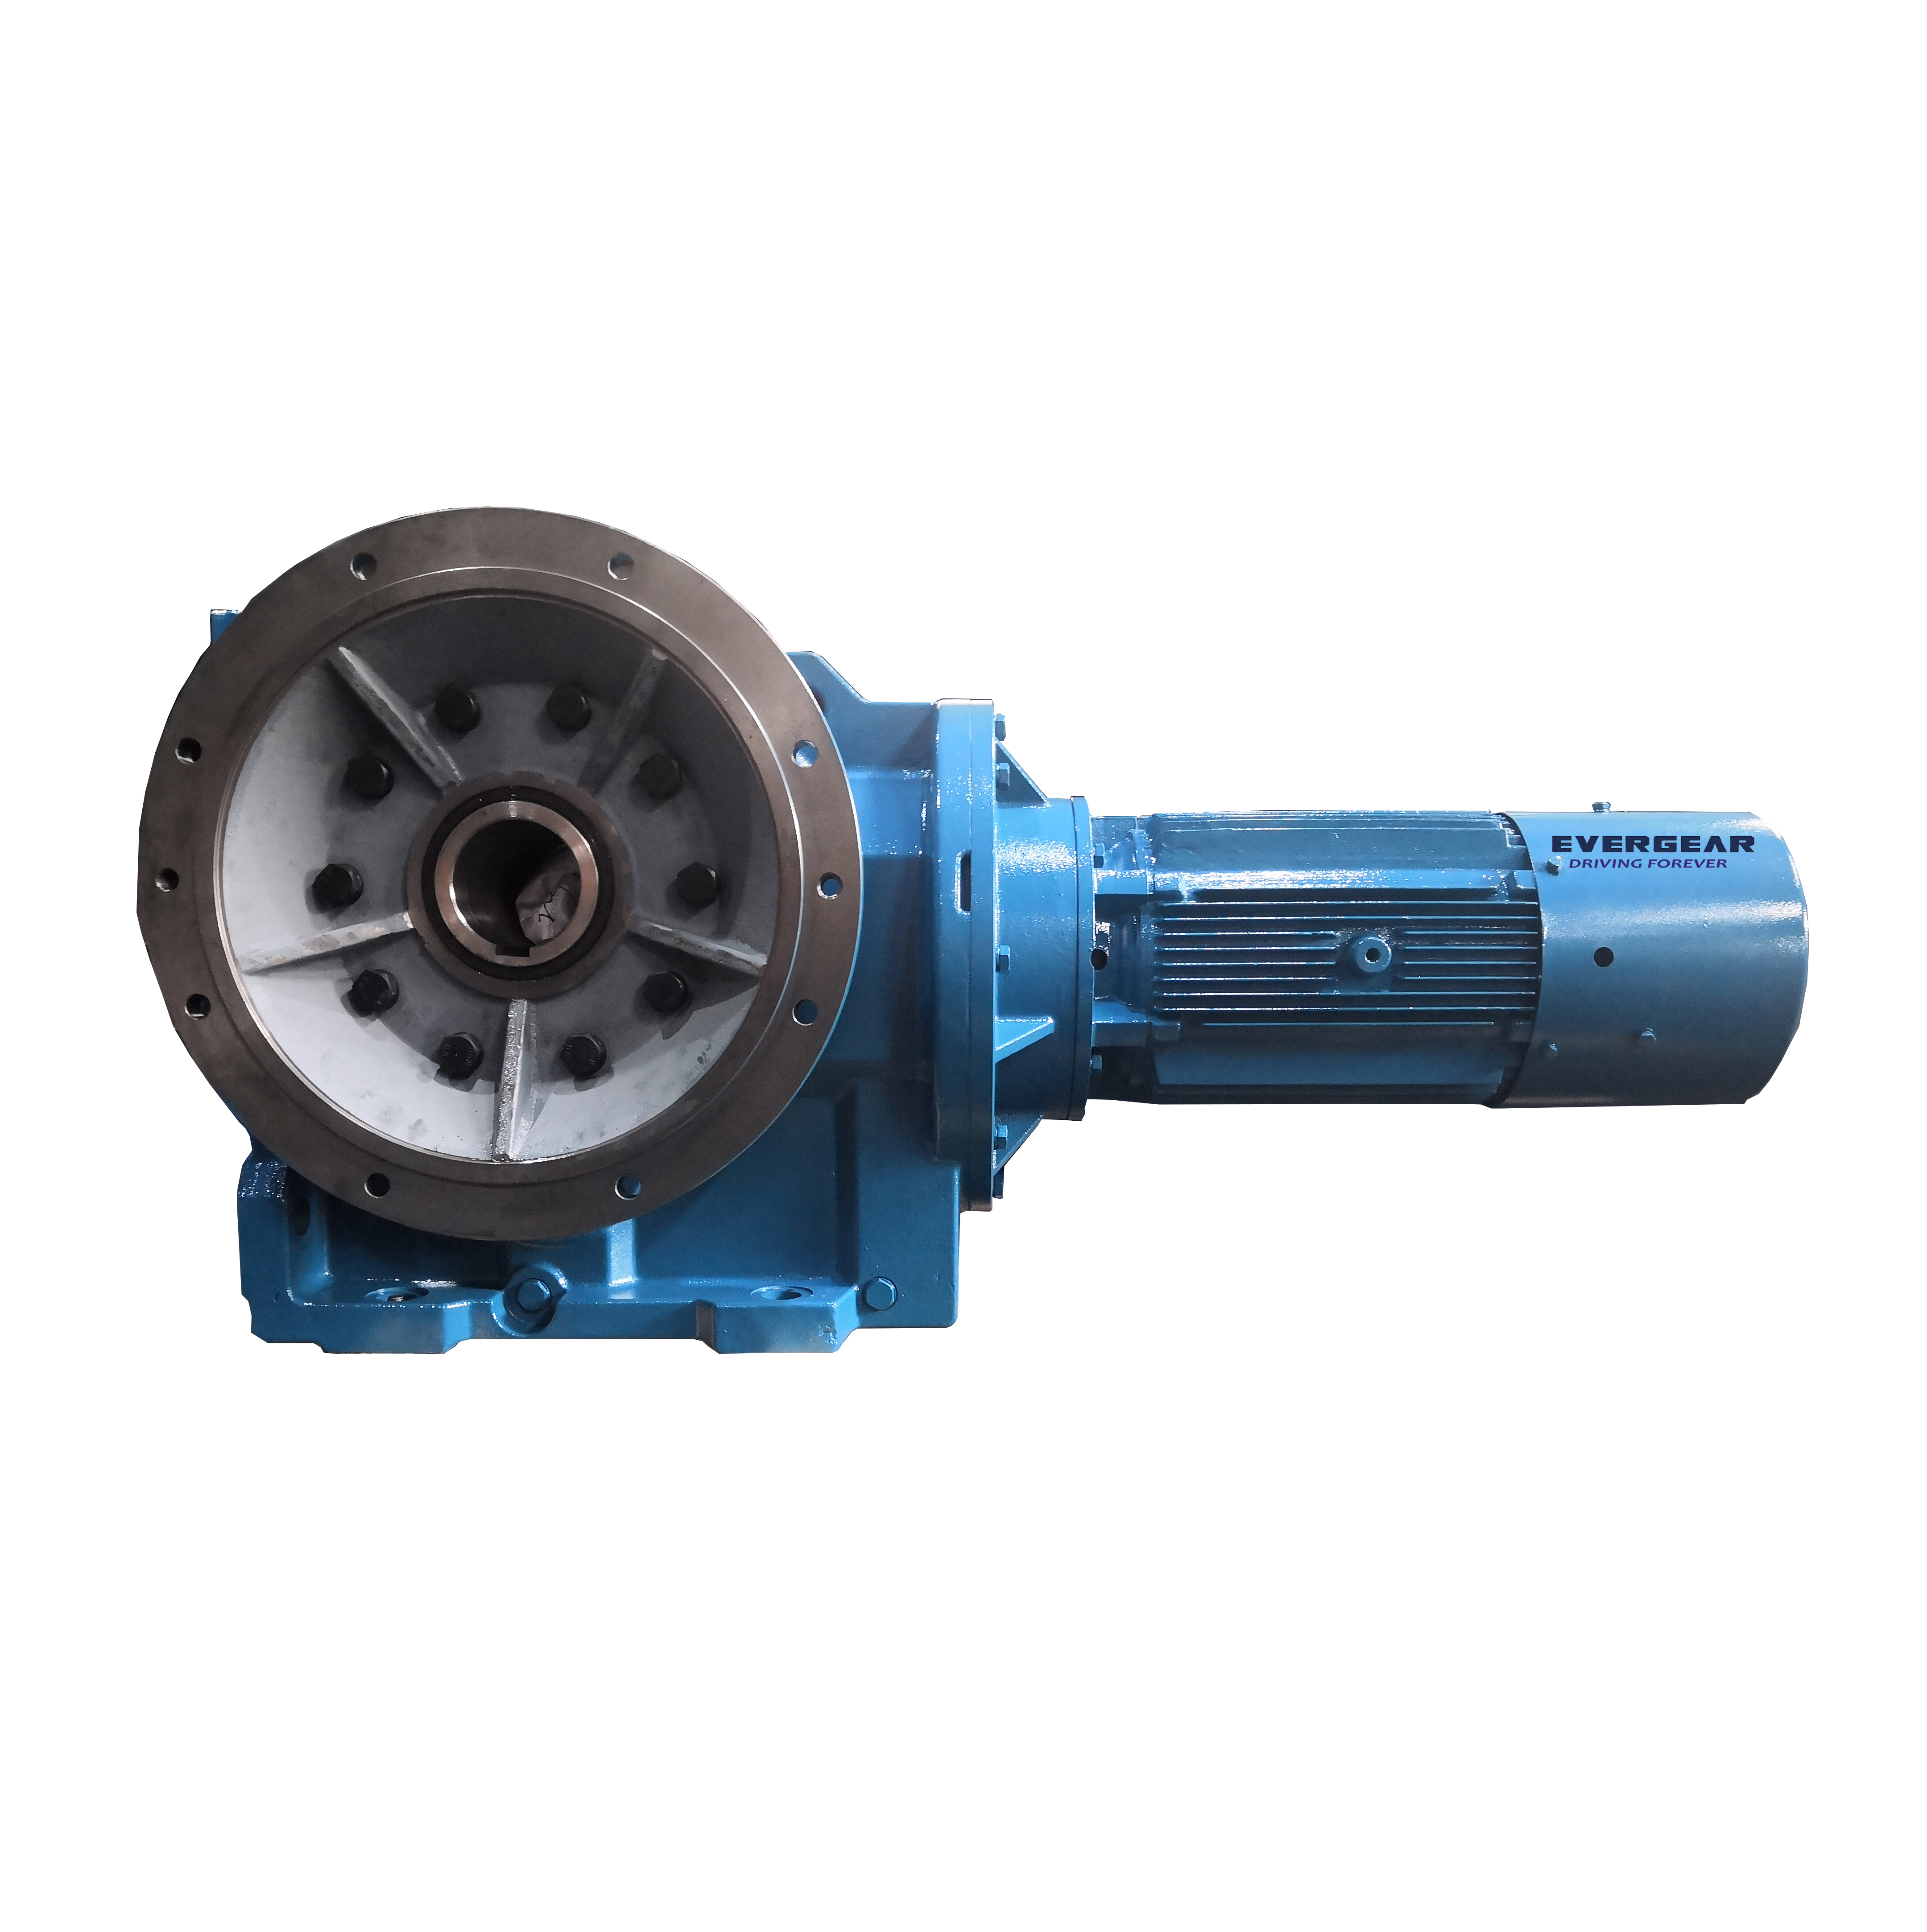 EVERGEAR K series gear box with 0.55 kw motor hollow output shaft